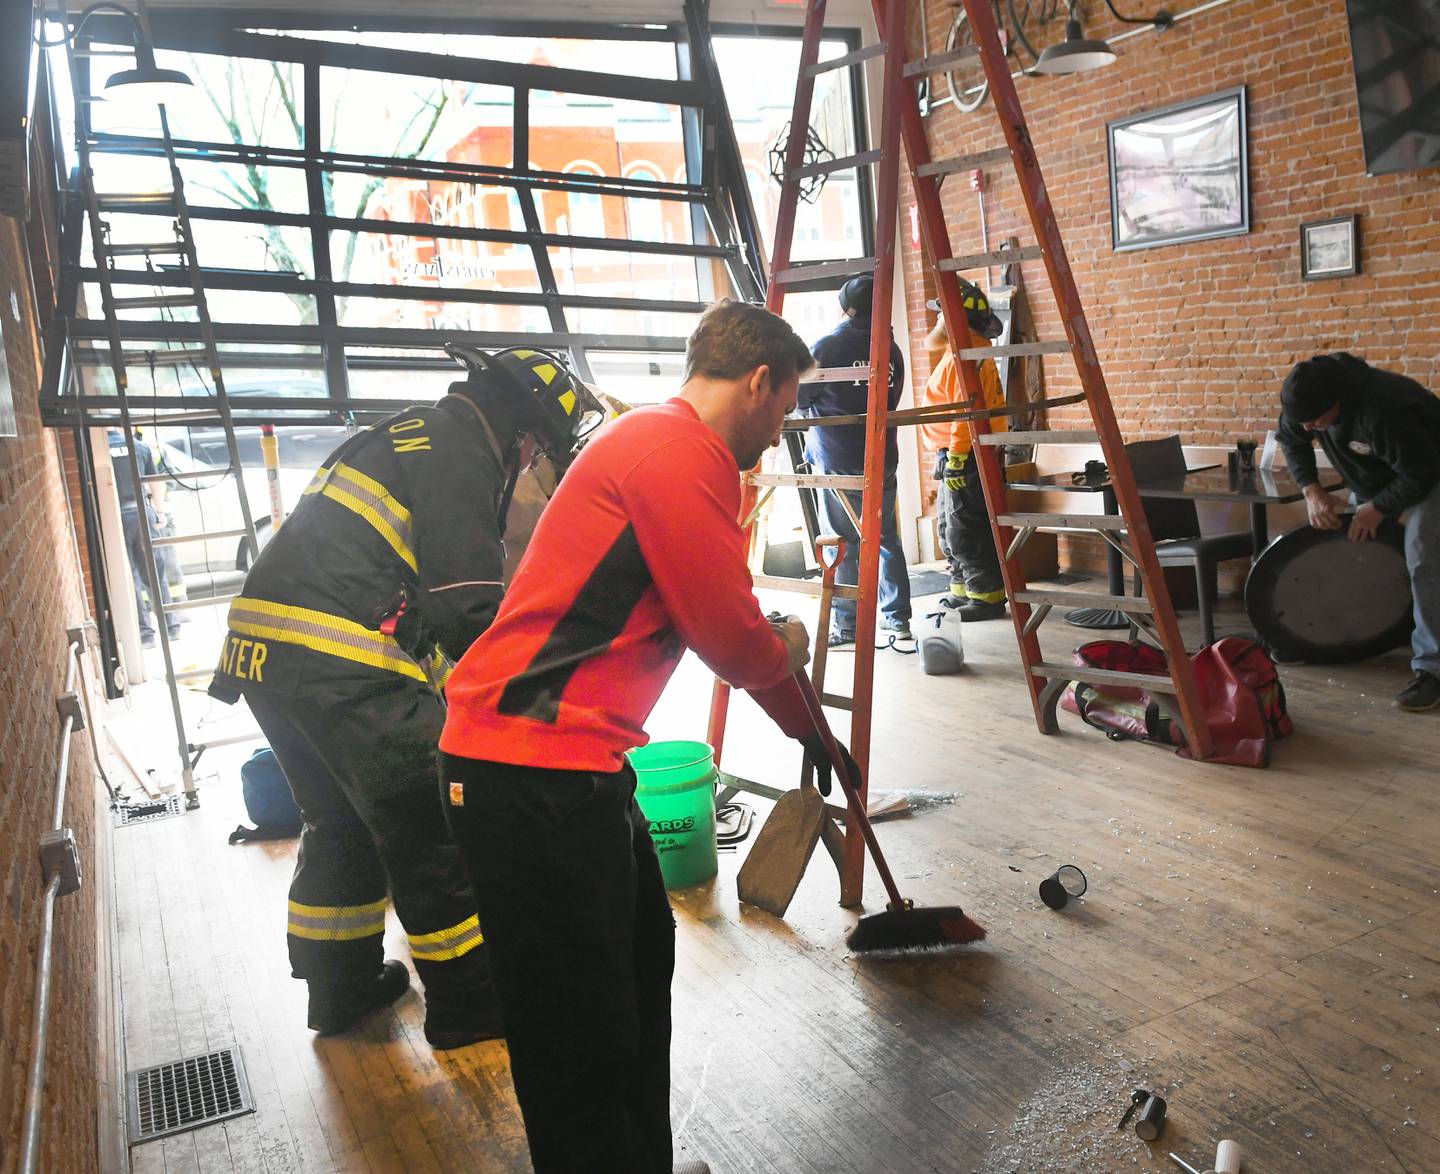 Dan Gale, of Oregon, and firefighter sweep up broken glass after a vehicle crashed into the Ogle County Brewery in downtown Oregon early Sunday afternoon after being struck by another vehicle at the intersection of Illinois 64 and Illinois 2. Dan's father, Mark, is one of the owners of the building.